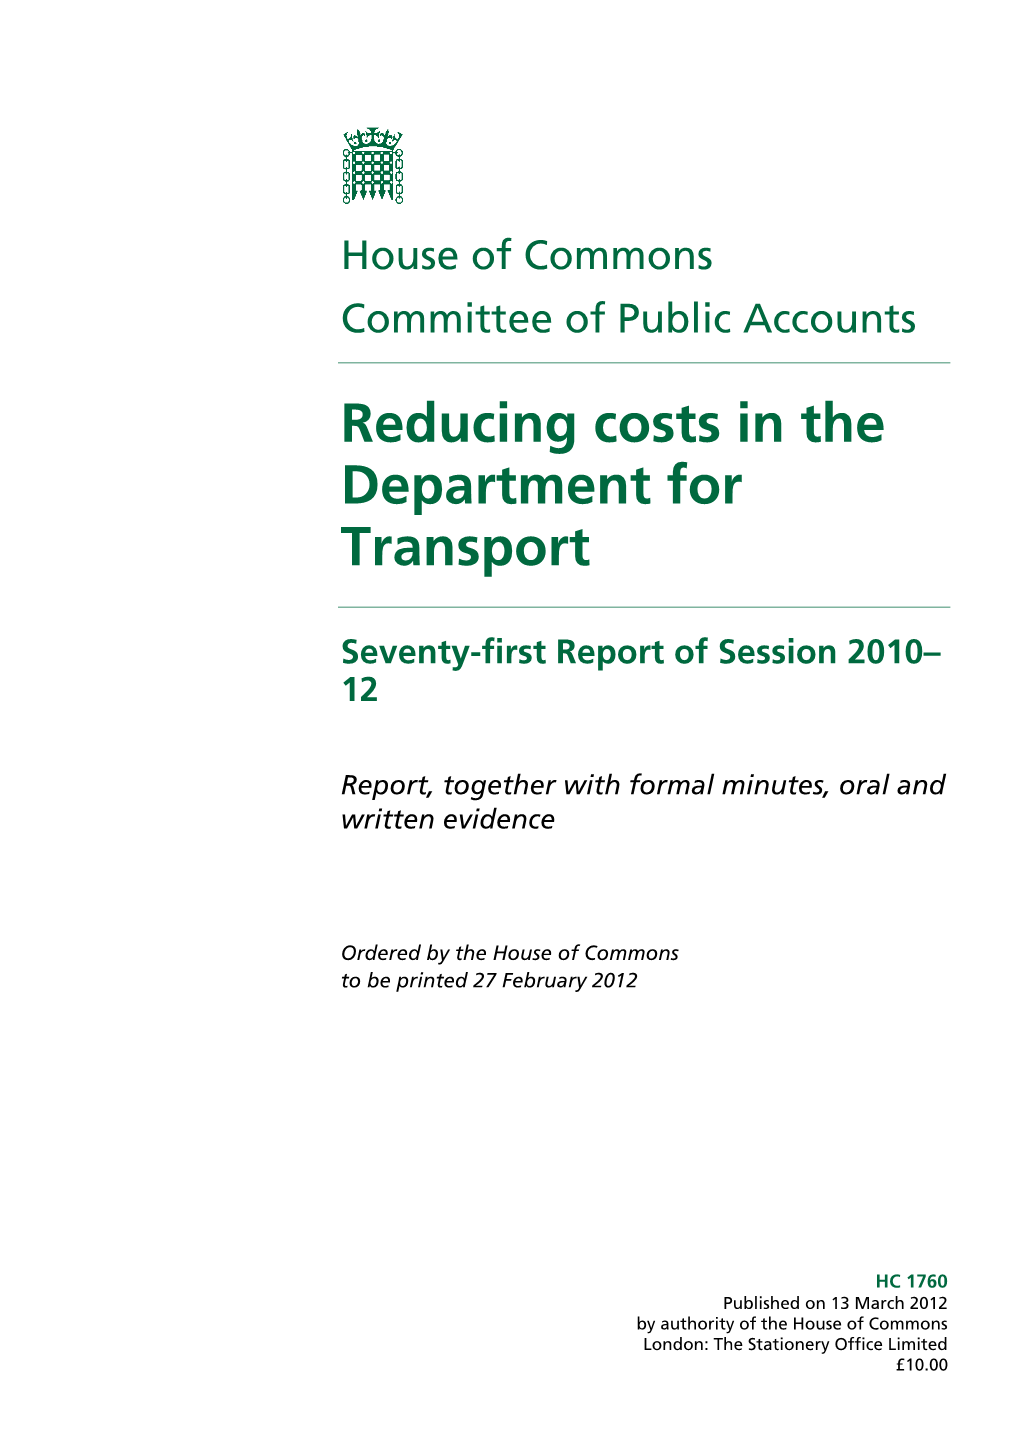 Reducing Costs in the Department for Transport